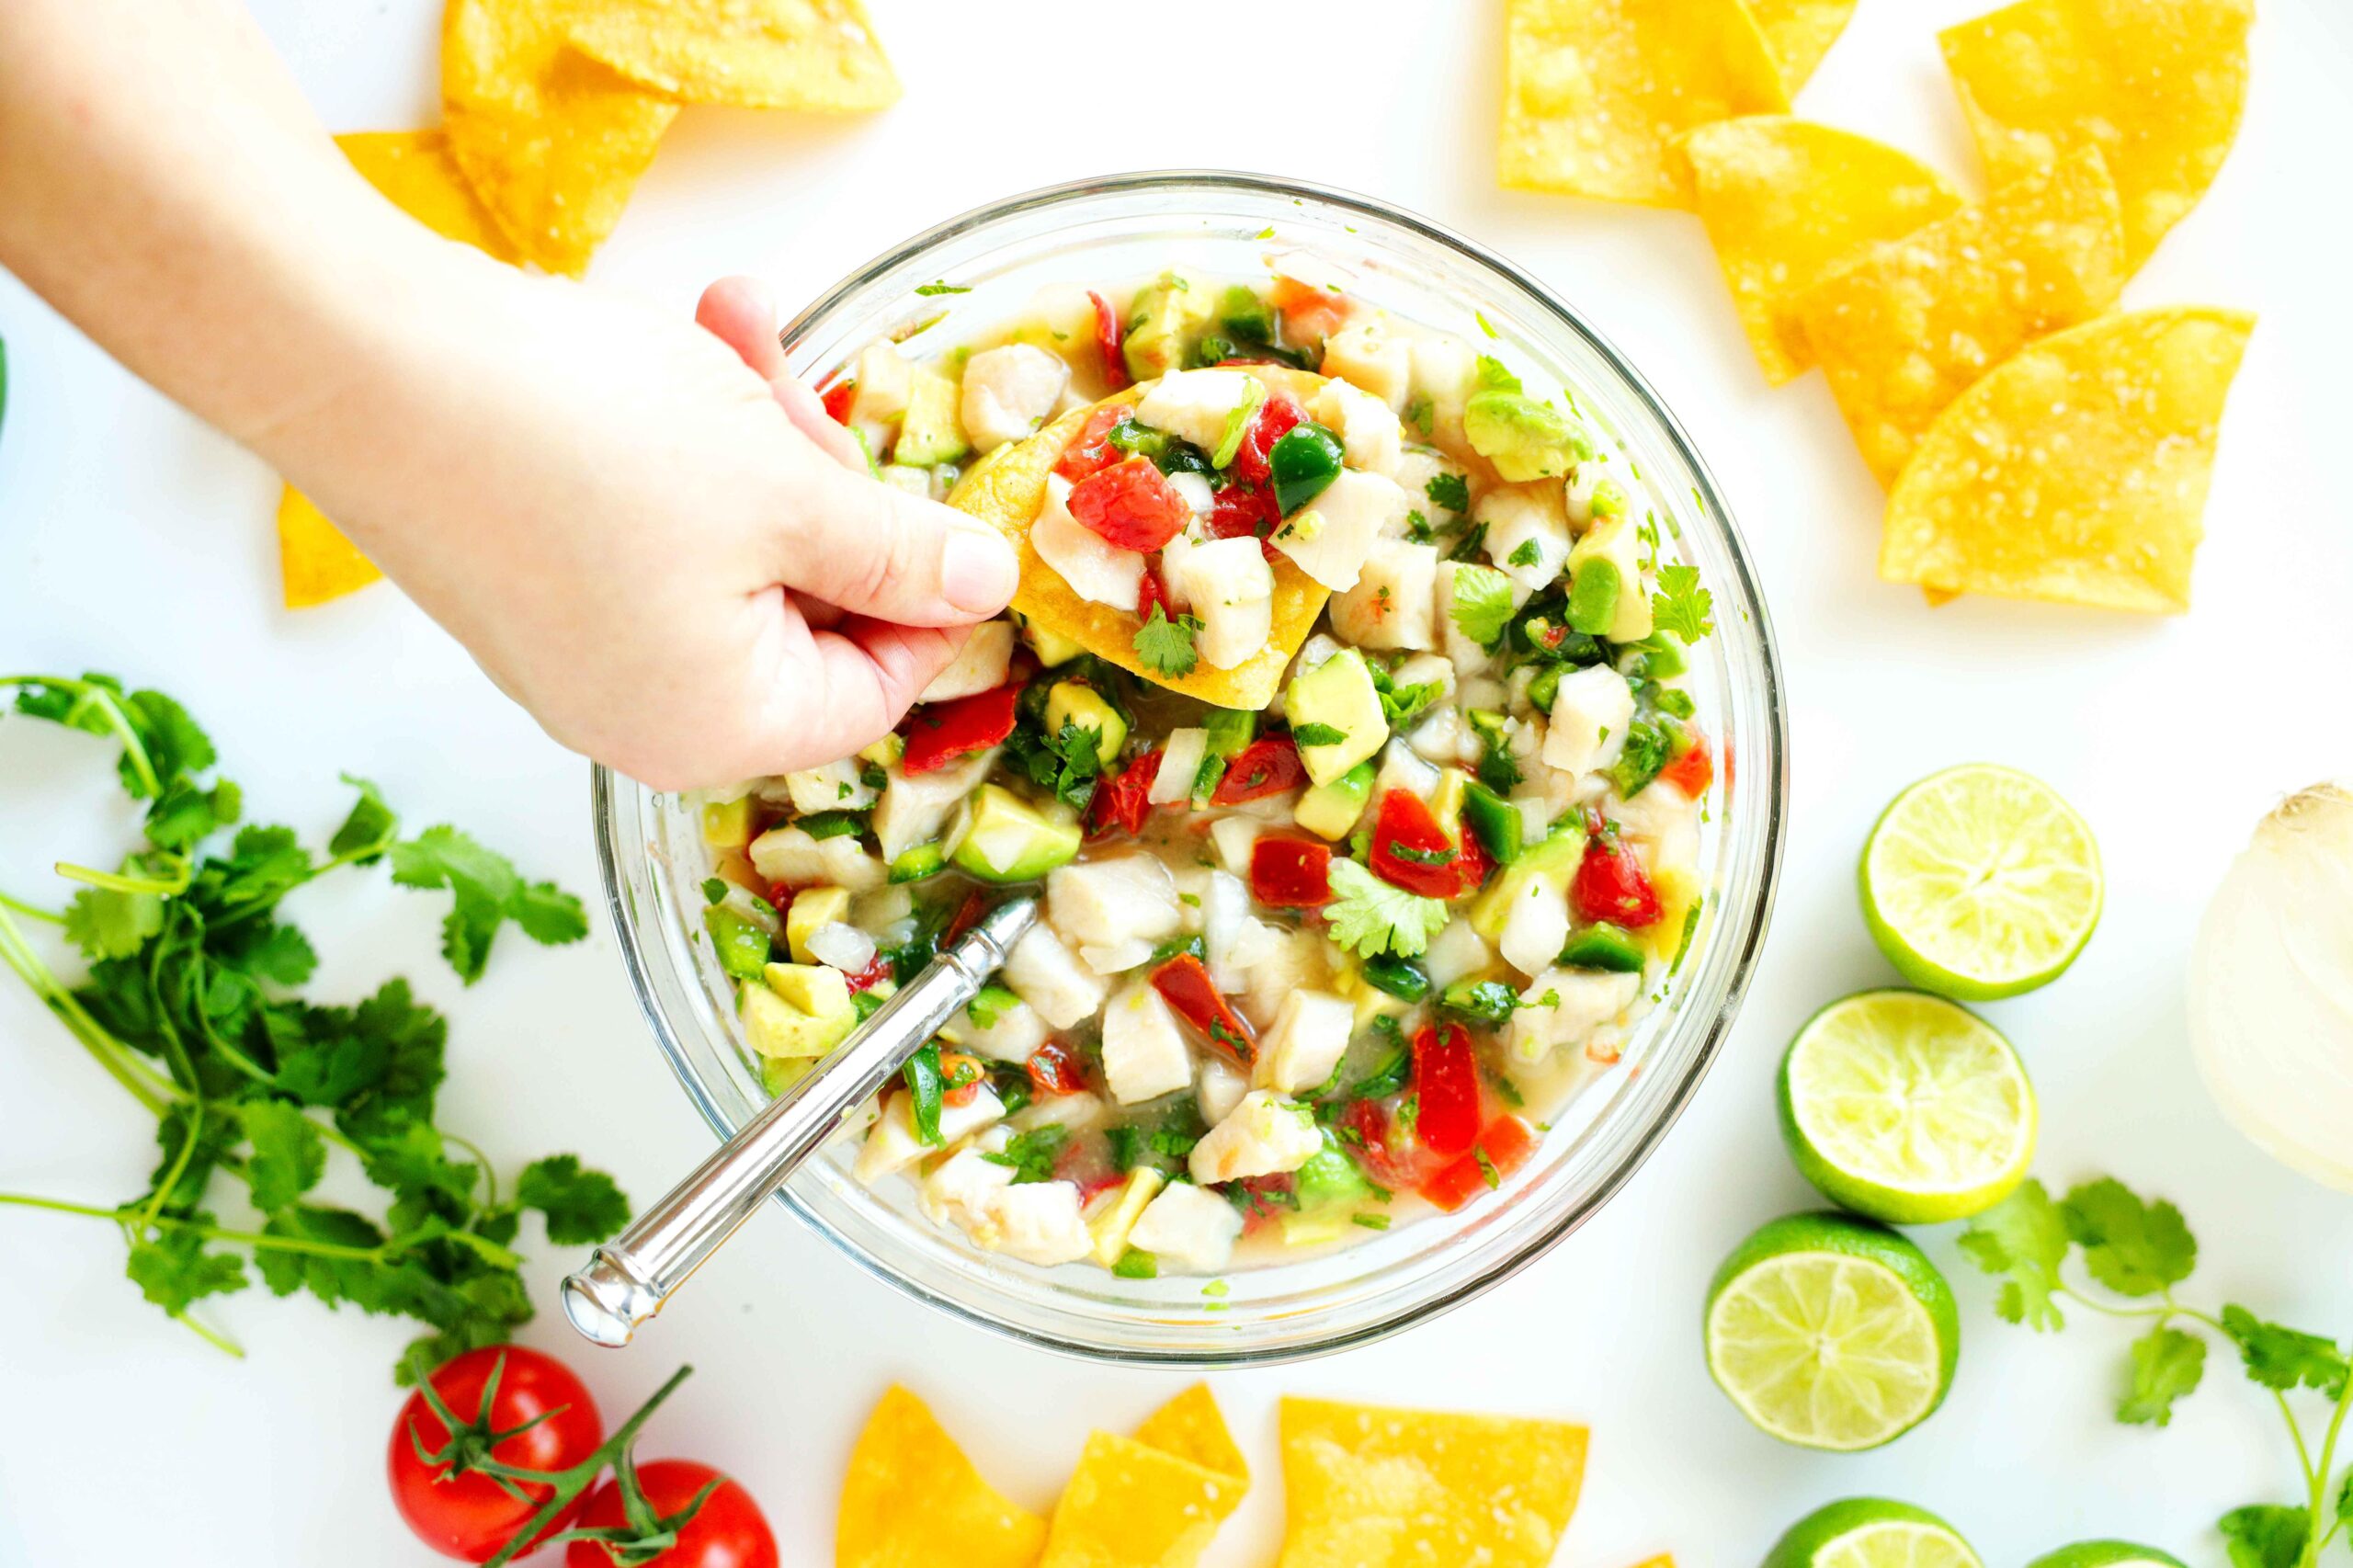  Ready to tingle your senses? Meet ceviche, the dish that's a party in your mouth.